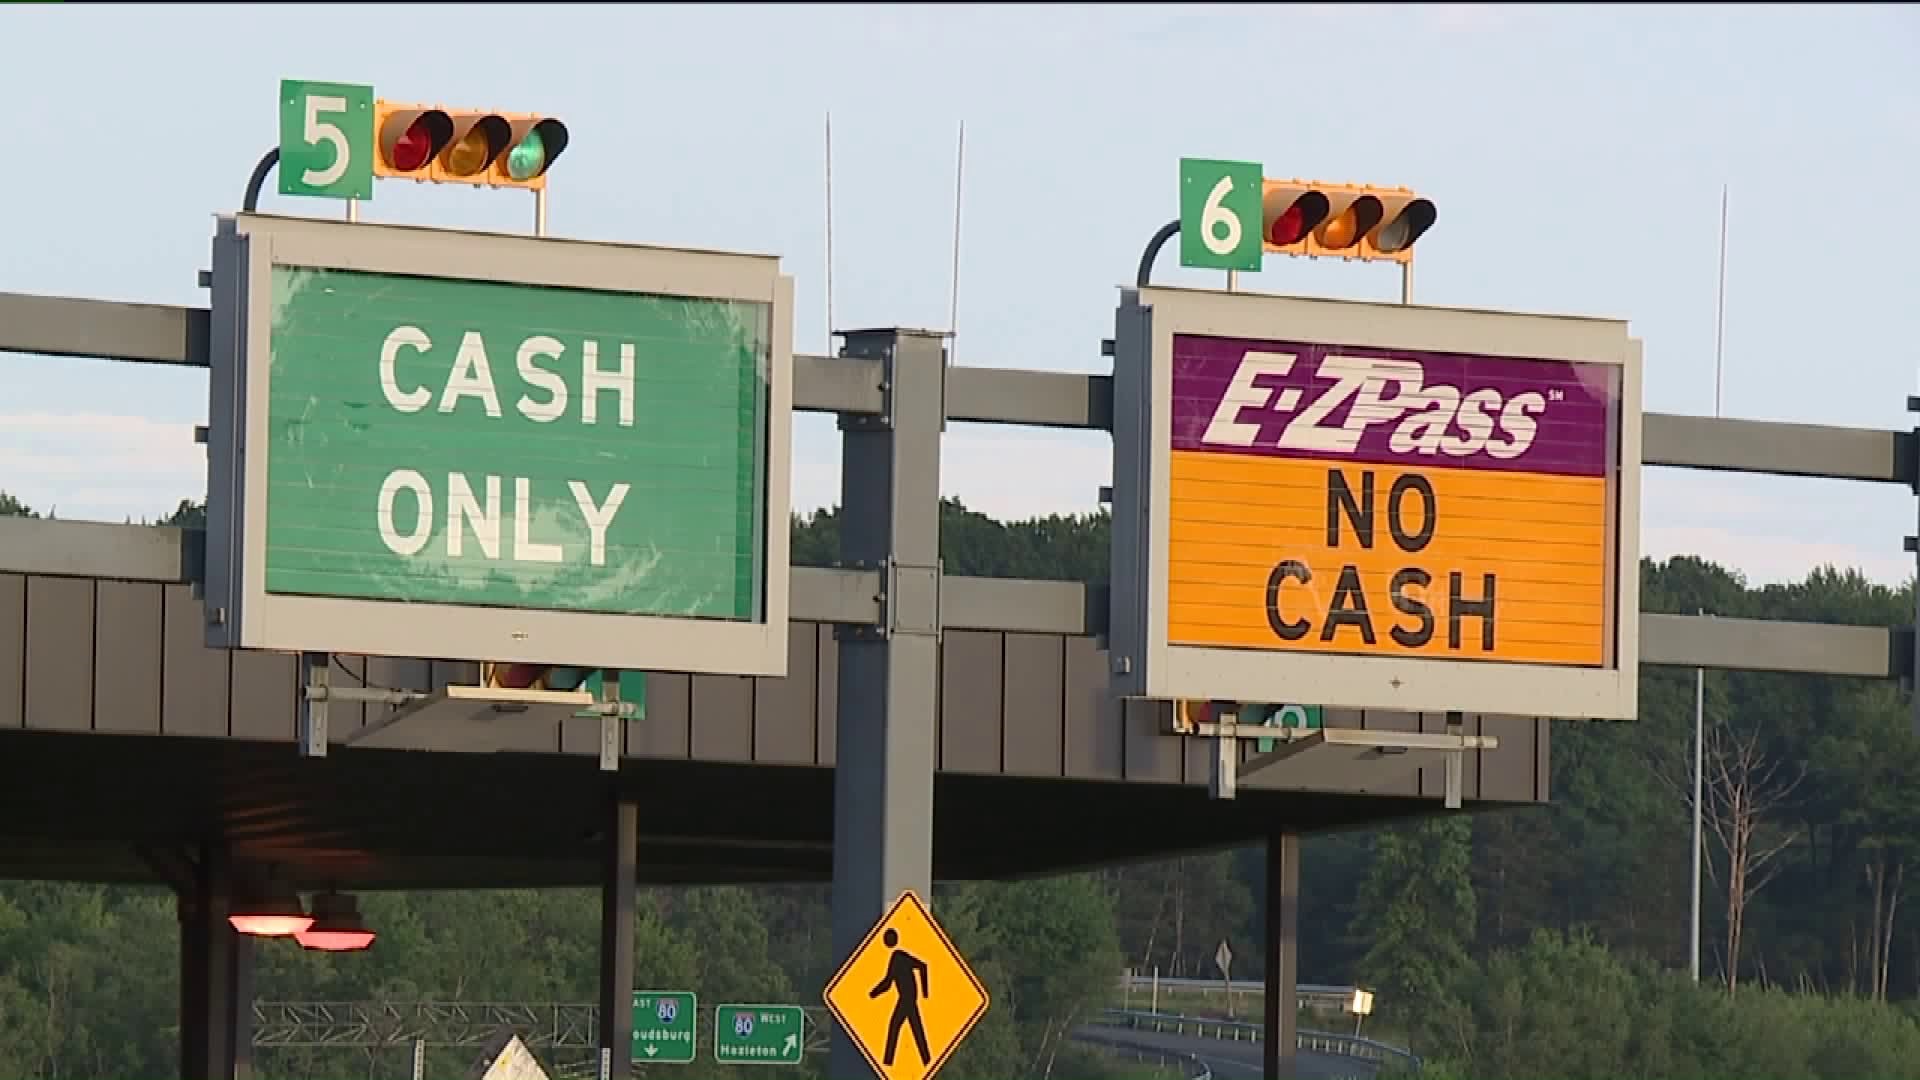 Toll Violators Have Until Friday to Pay Up or Have Their Vehicle Registrations Revoked